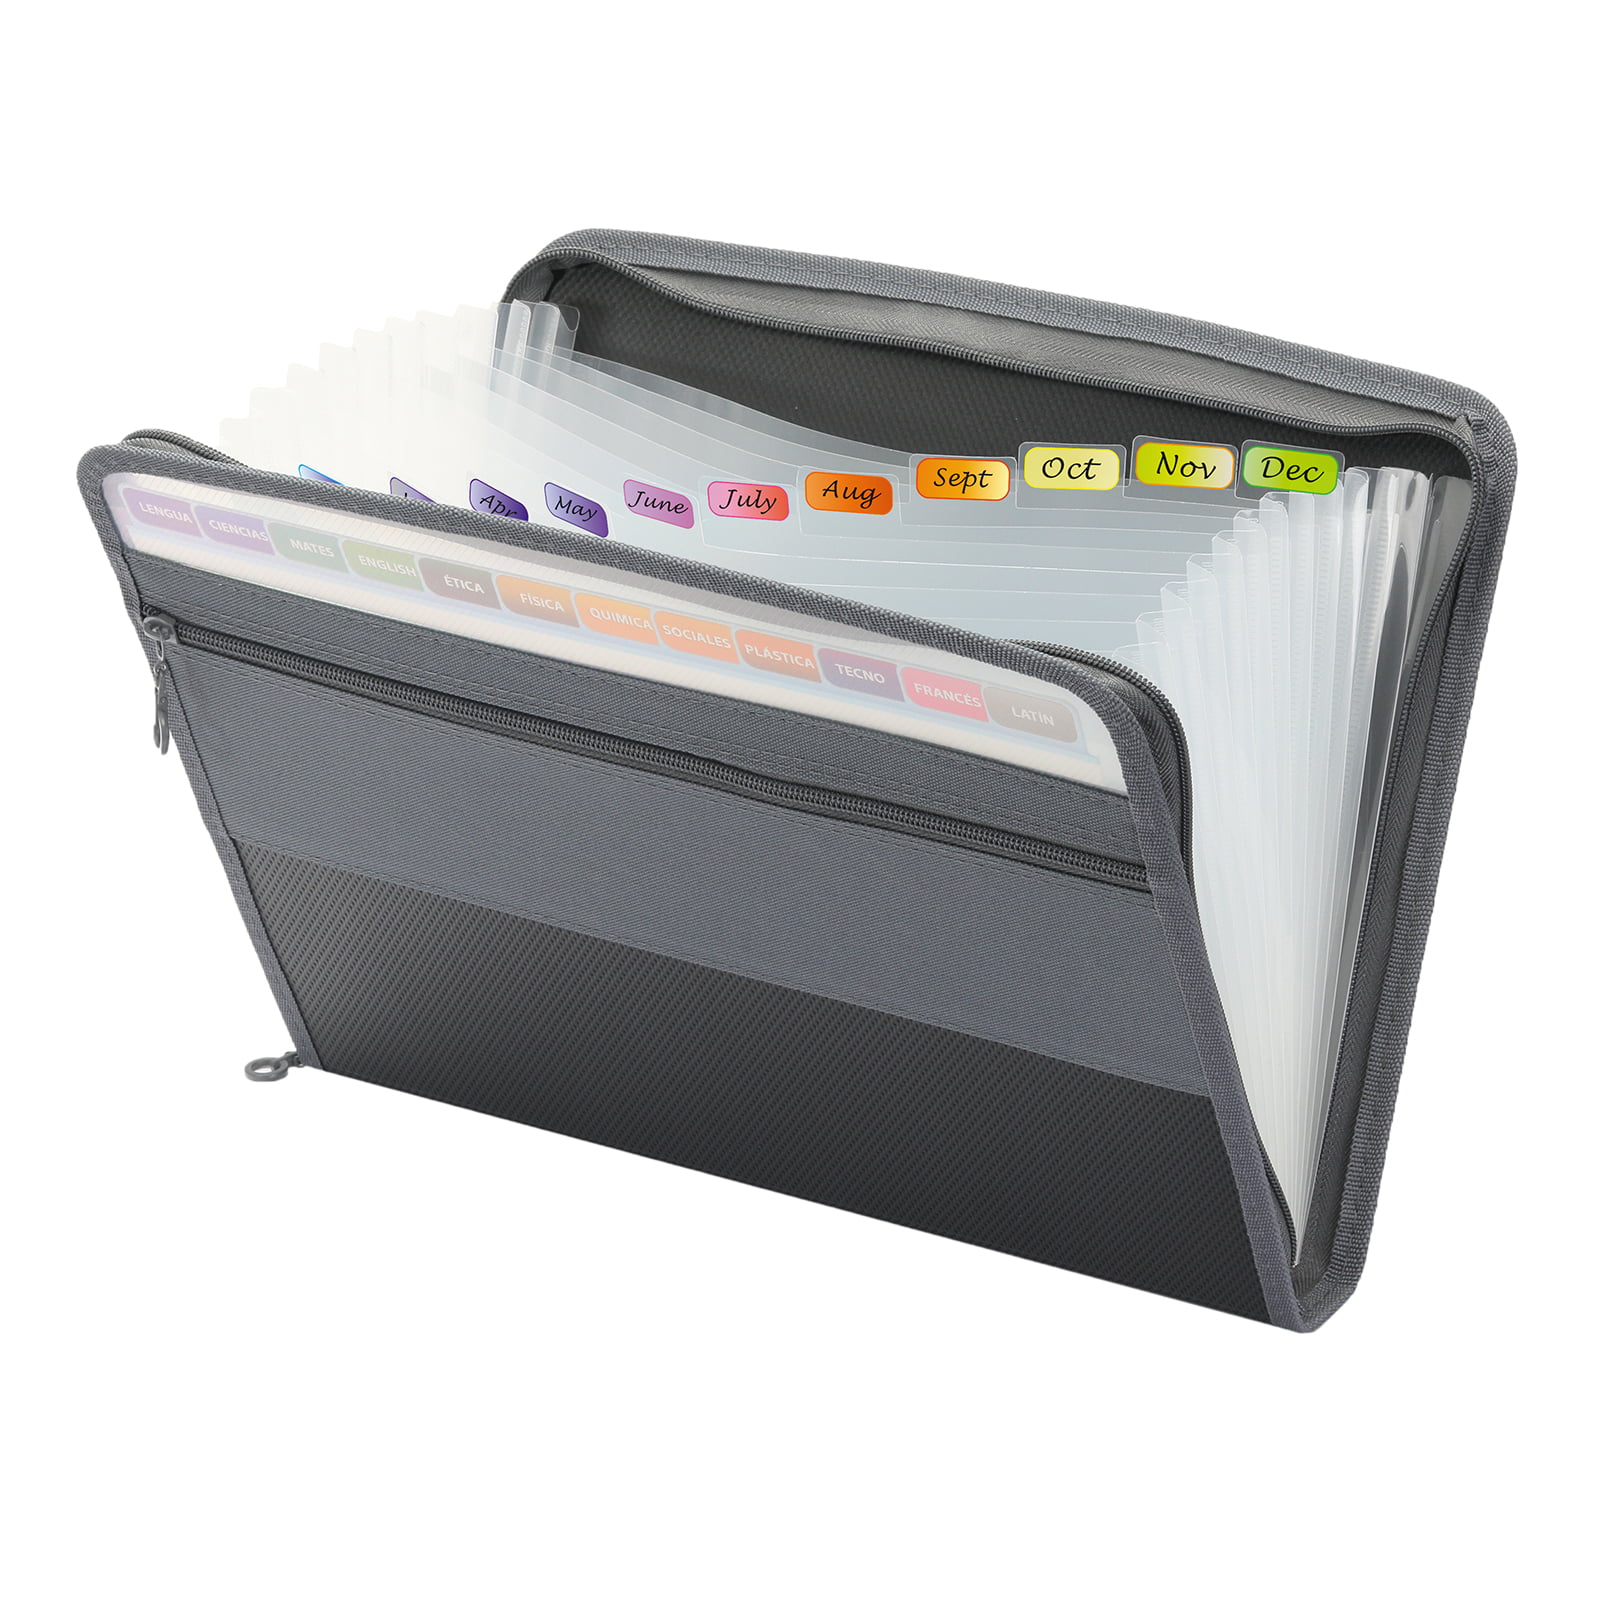 13 Pockets Accordian Files Organiser Accordion Zip Document Organiser with Tabs Green A4 Filing Folders Expanding File Folder with Zipper Expandable Rainbow Folder Organiser Box File Pouch 